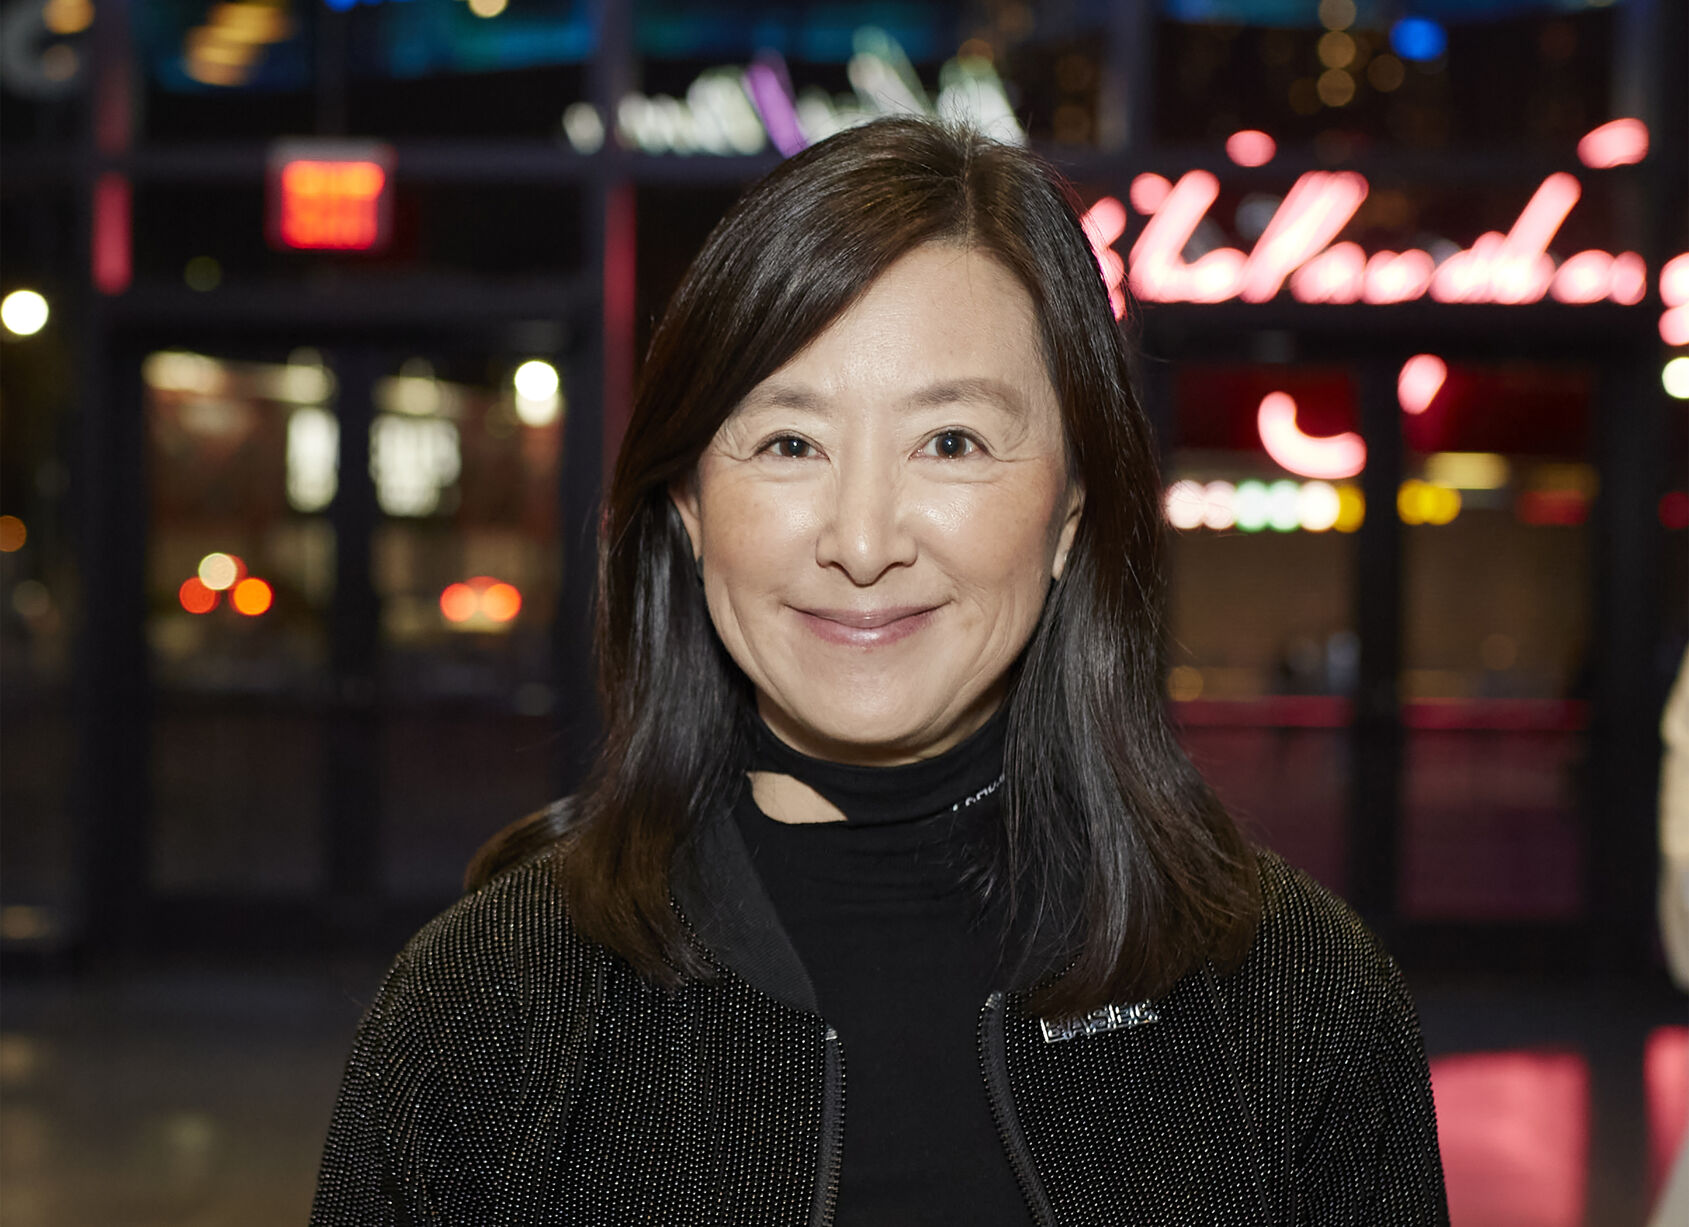 <p>In this photo photo provided by DKC News, Clara Wu Tsai, co-owner of the Brooklyn Nets, stands in front of the Barclays Center in Brooklyn borough of New York in 2021. Wu Tsai launched the largest business accelerator for minority founders of early-stage startups on Monday, Nov. 7, 2022. Named BK-XL, the accelerator will invest up to $500,000 to 12 startups led by Black, Indigenous and other minority founders in 2023. (Ivy Newman/DKC News via AP)</p>   PHOTO CREDIT: Ivy Newman 